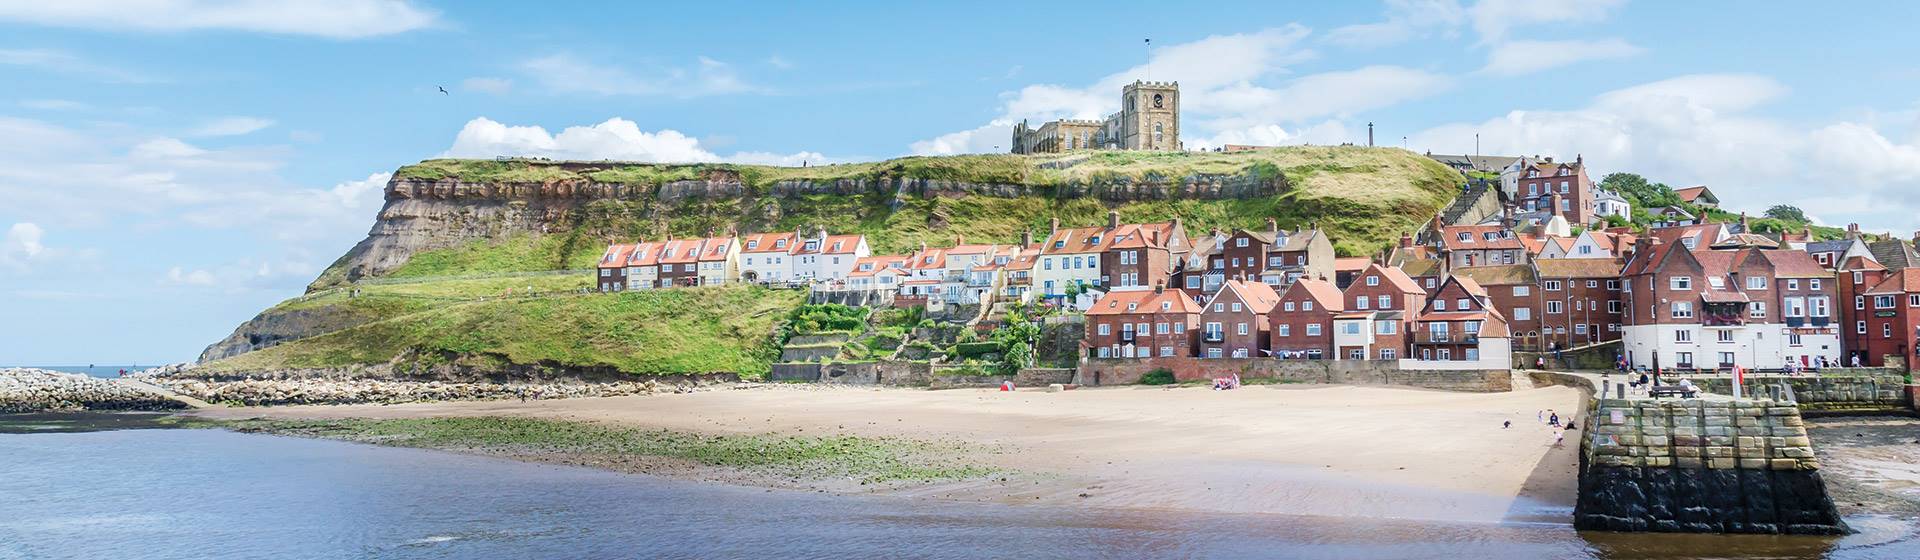 Royal Whitby & the North Yorkshire Moors